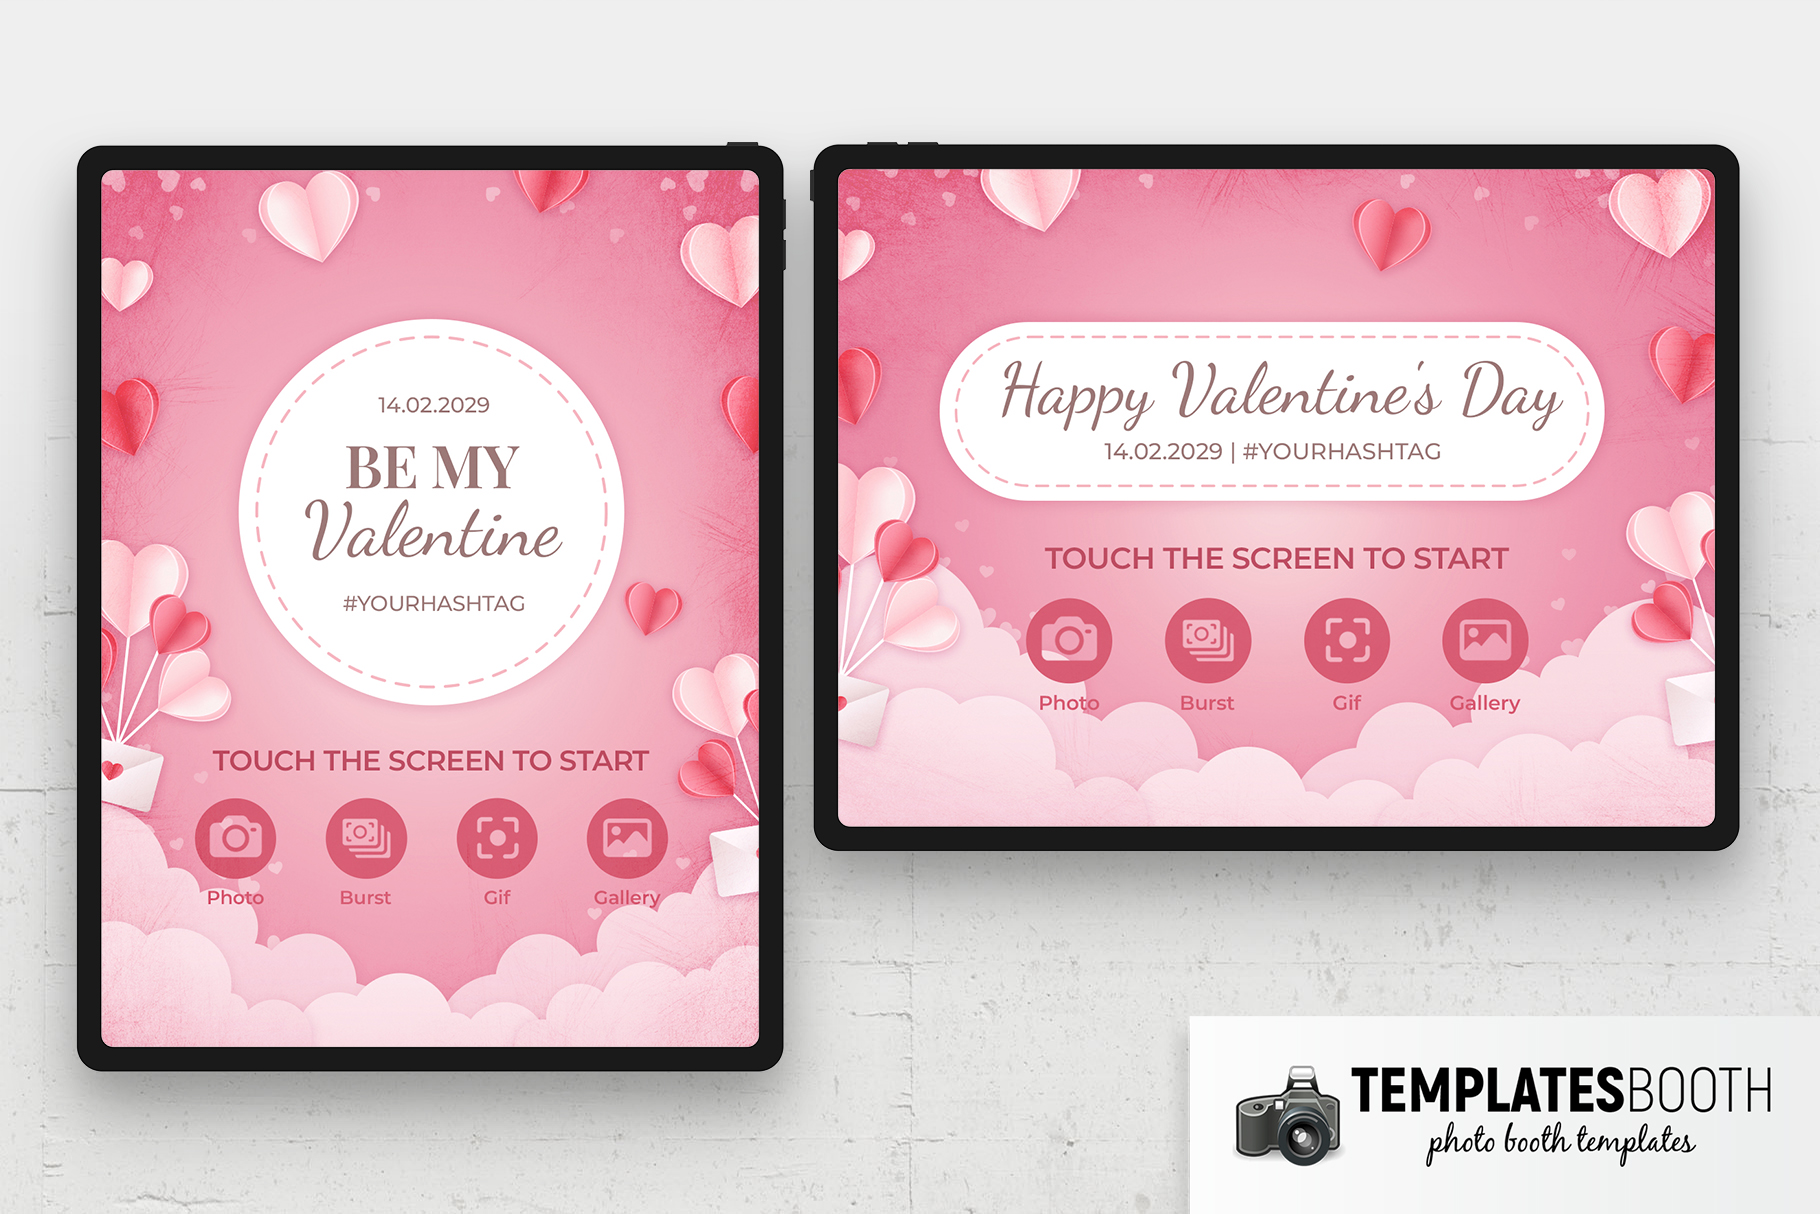 Valentine's Day Photo Booth Welcome Screen